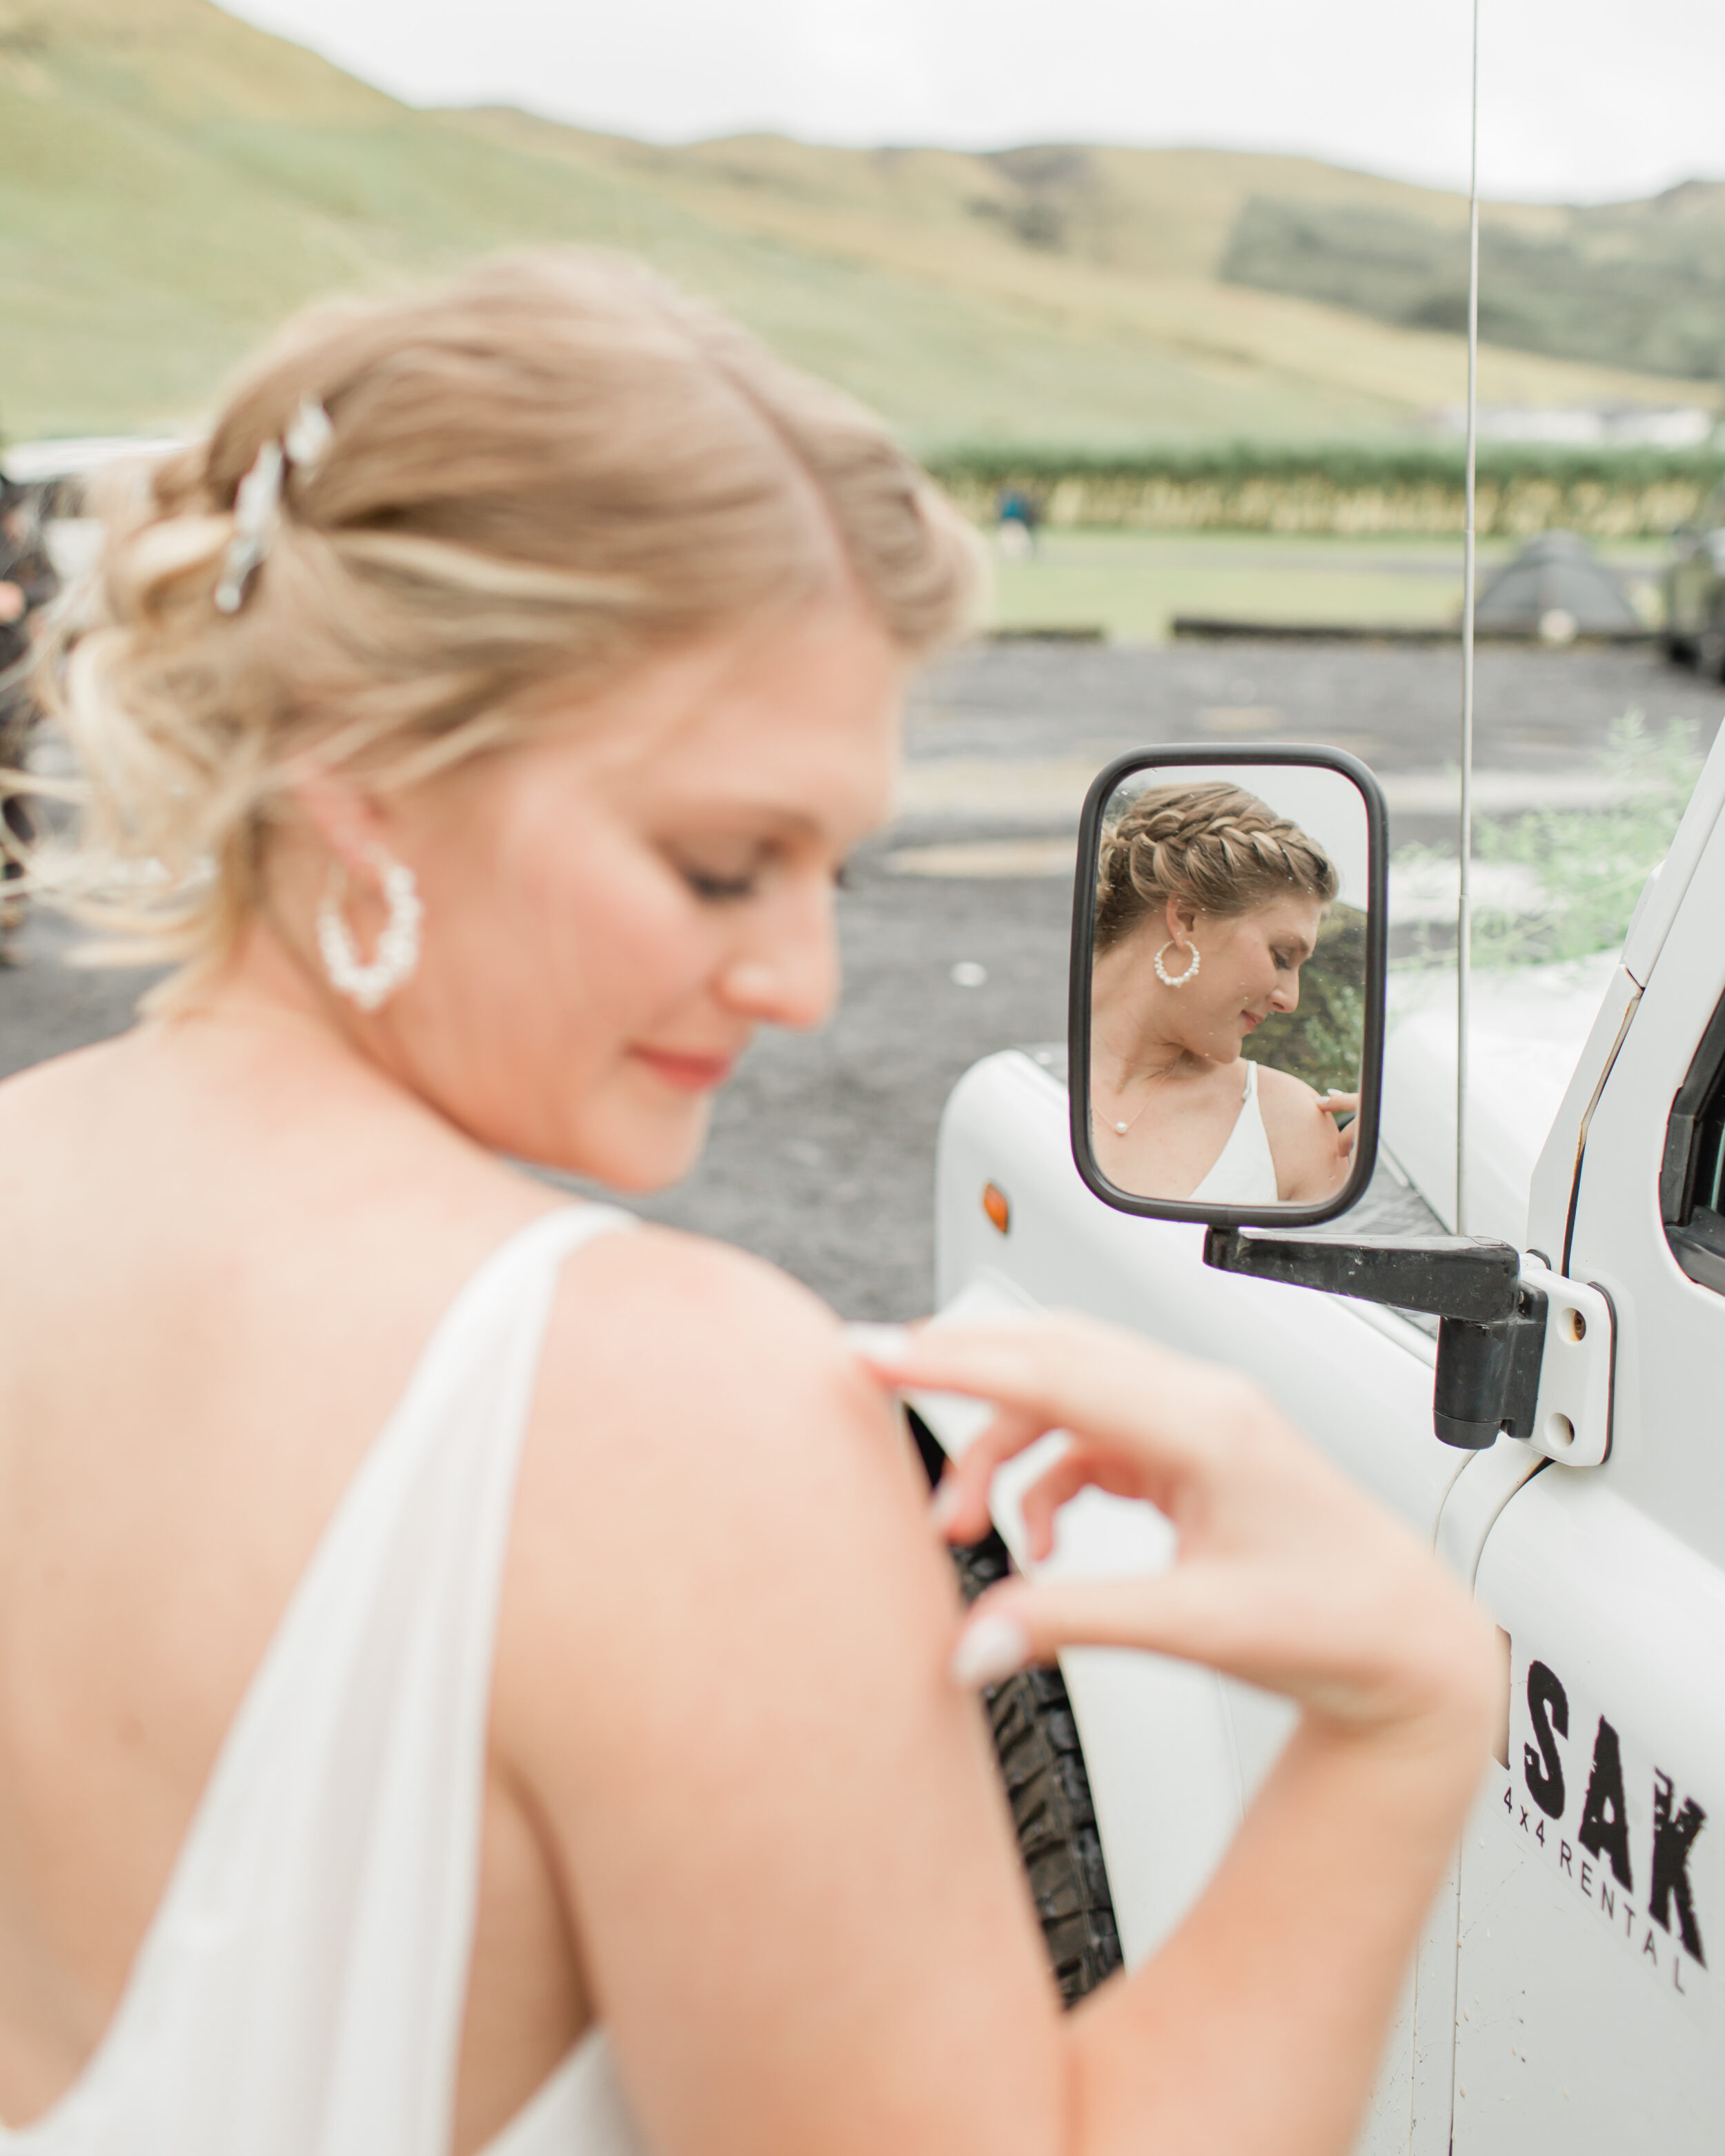 A bride looks at her shoulder while standing near a 4x4 vehicle in Iceland.